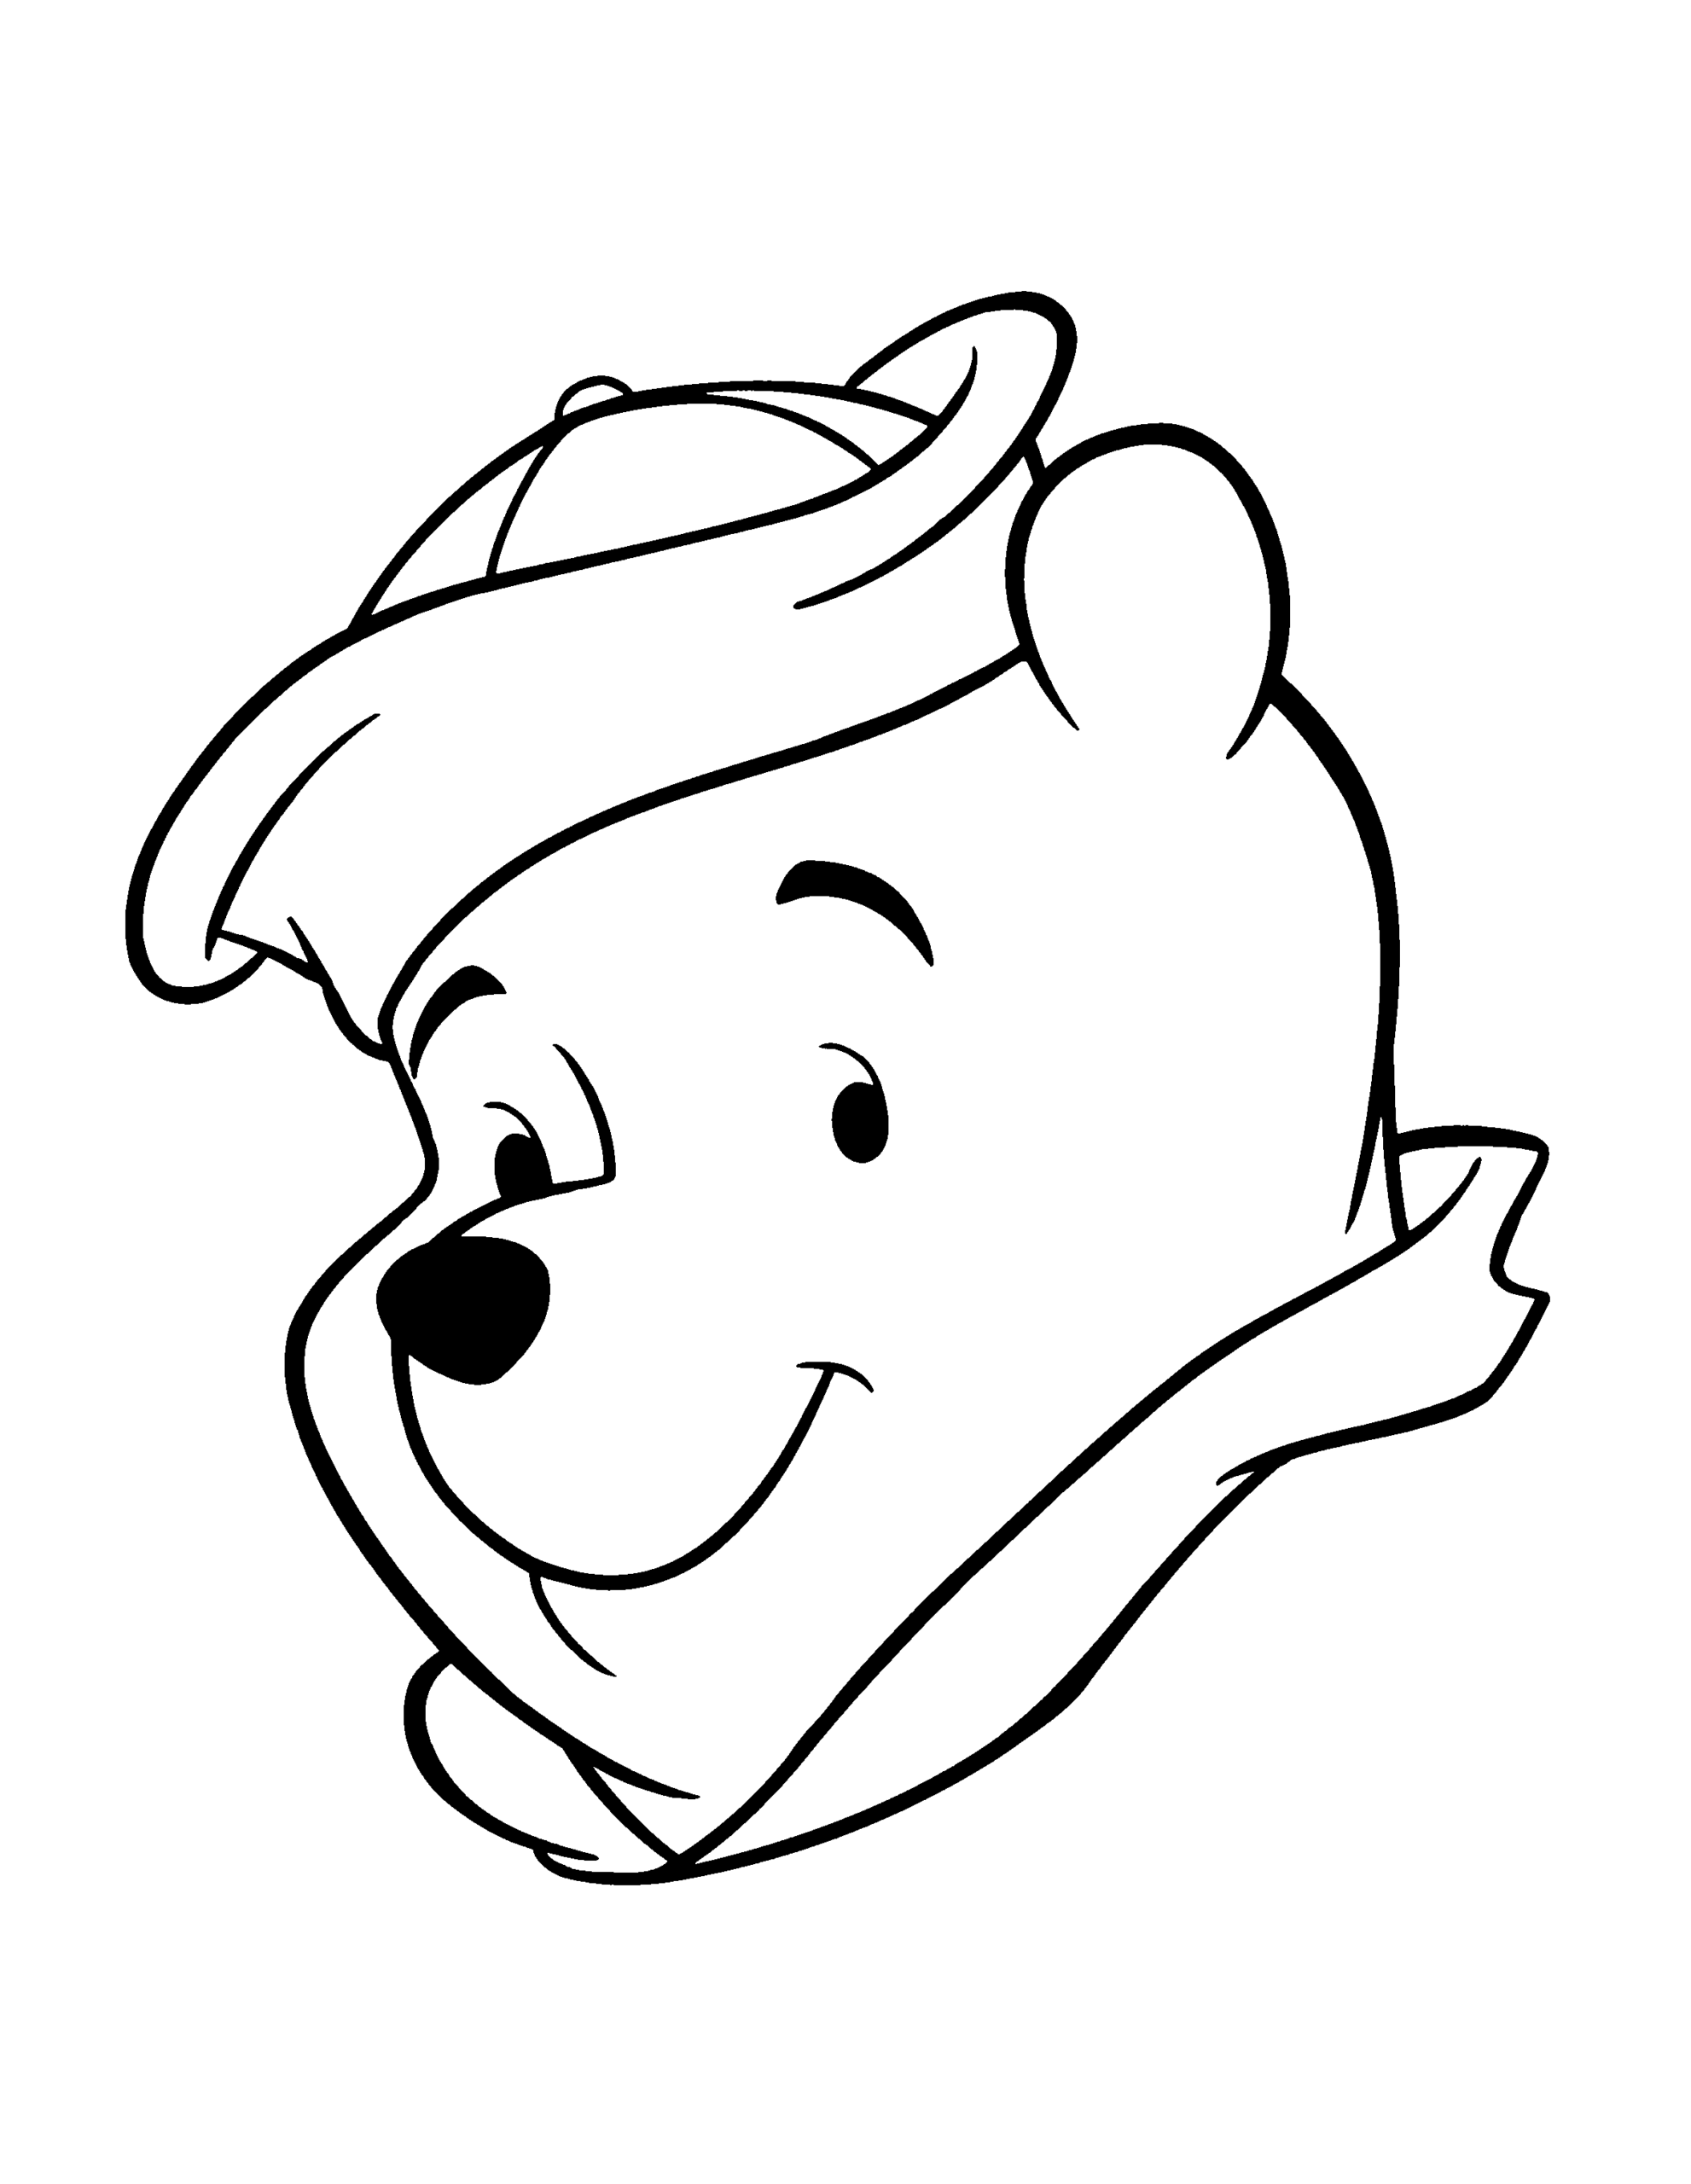 Winnie the Pooh Coloring Pages Cartoons winnie the pooh 94 Printable 2020 7217 Coloring4free